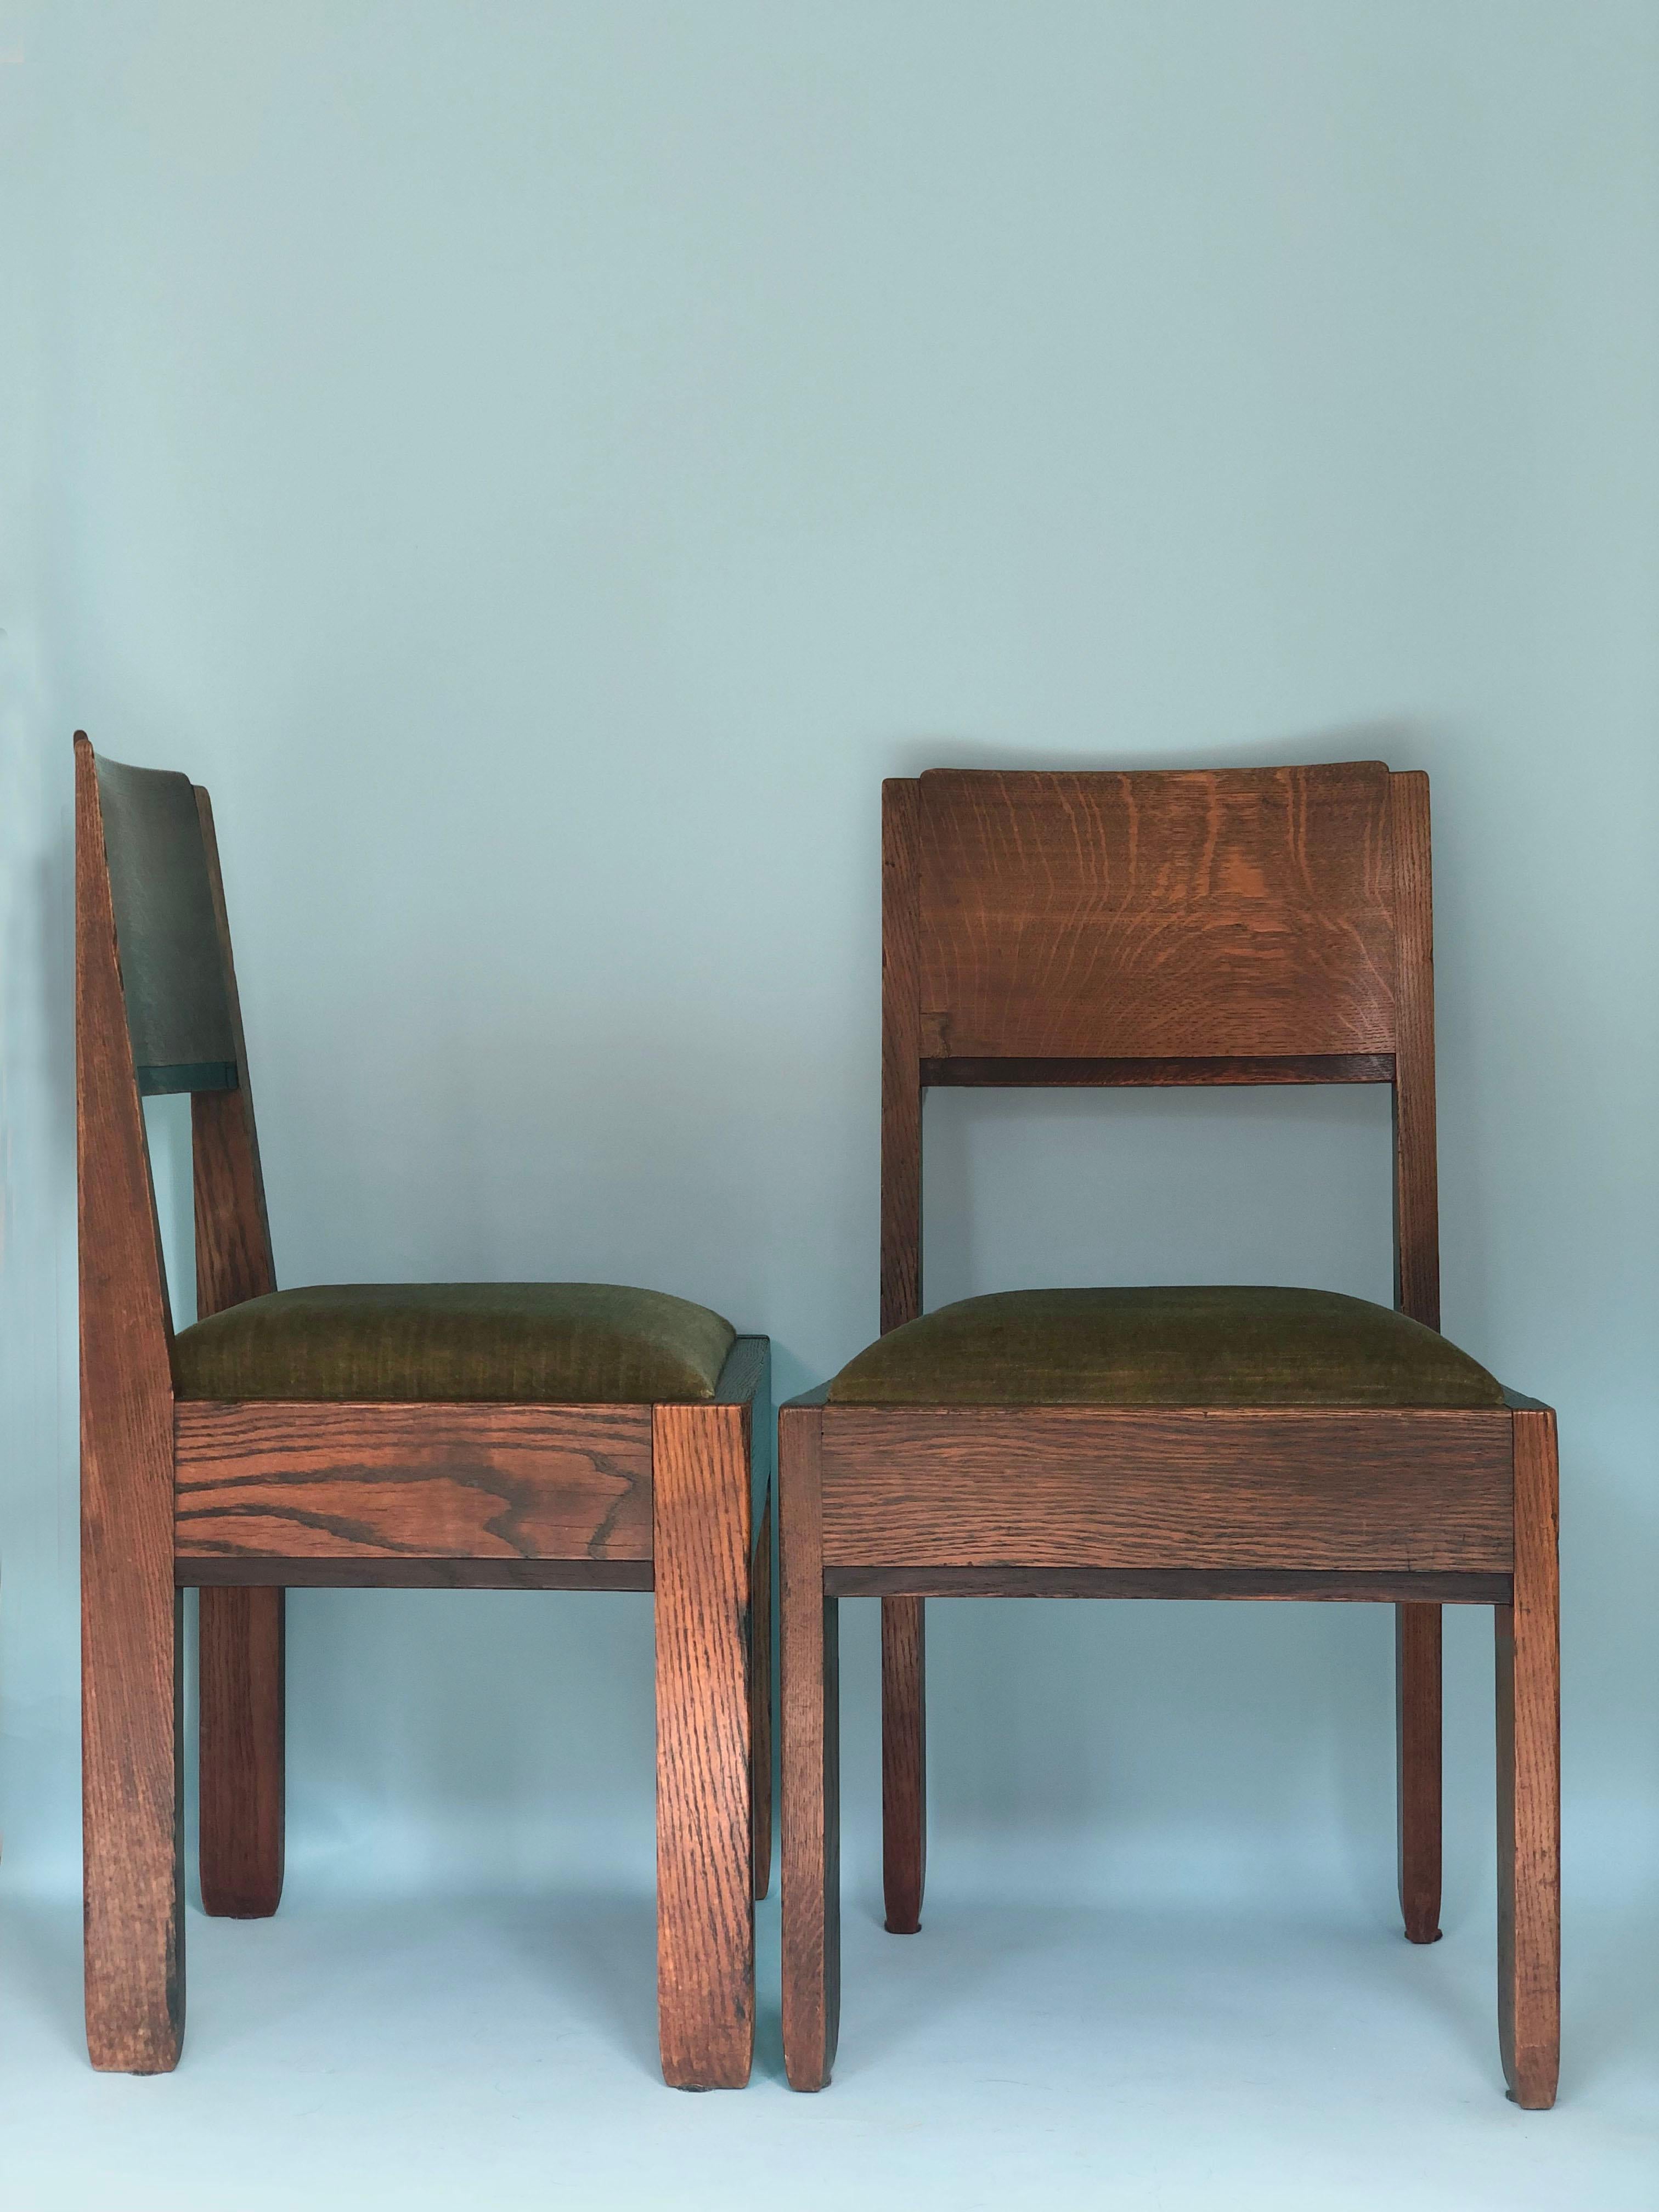 Early 20th Century ON HOLD Art Deco Oak Dining Chairs by J.A. Muntendam for L.O.V. Oosterbeek 1920s